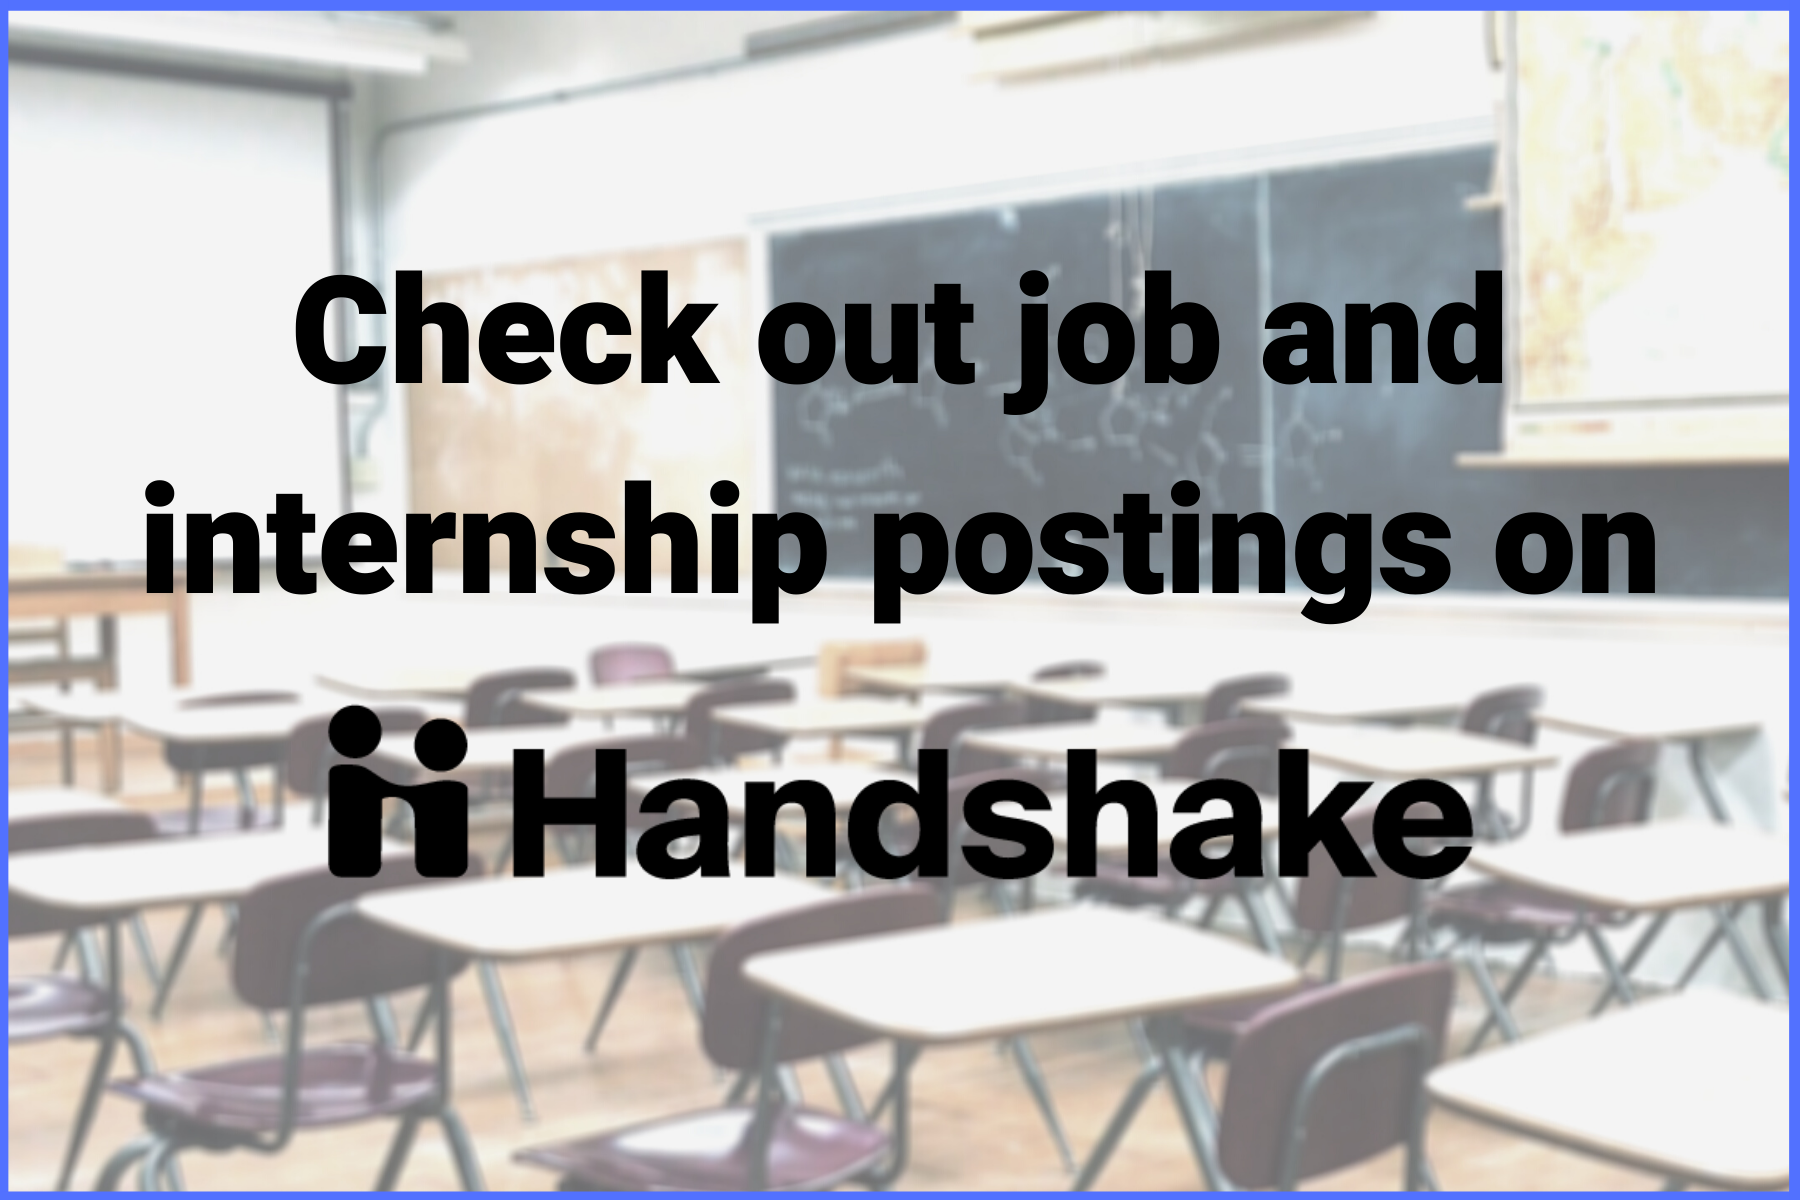 Find opportunities in education on Handshake